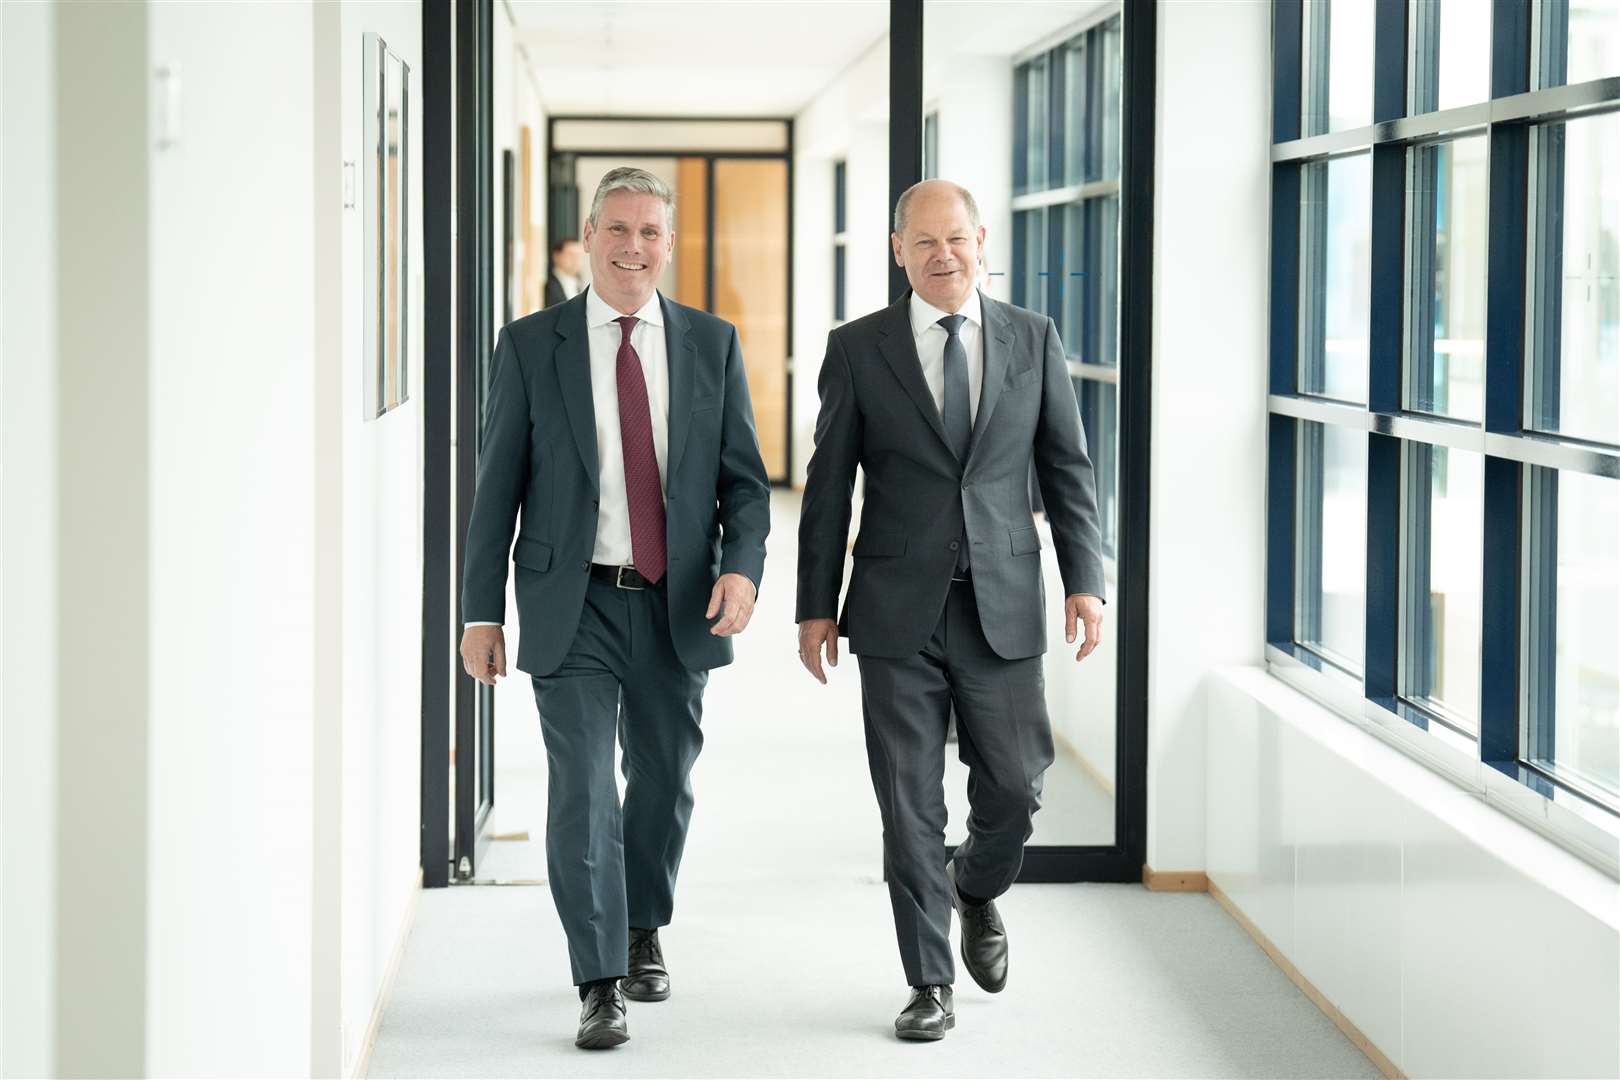 Sir Keir Starmer and Chancellor Olaf Scholz discussed Brexit and Ukraine during their meeting in Berlin (Stefan Rousseau/PA)